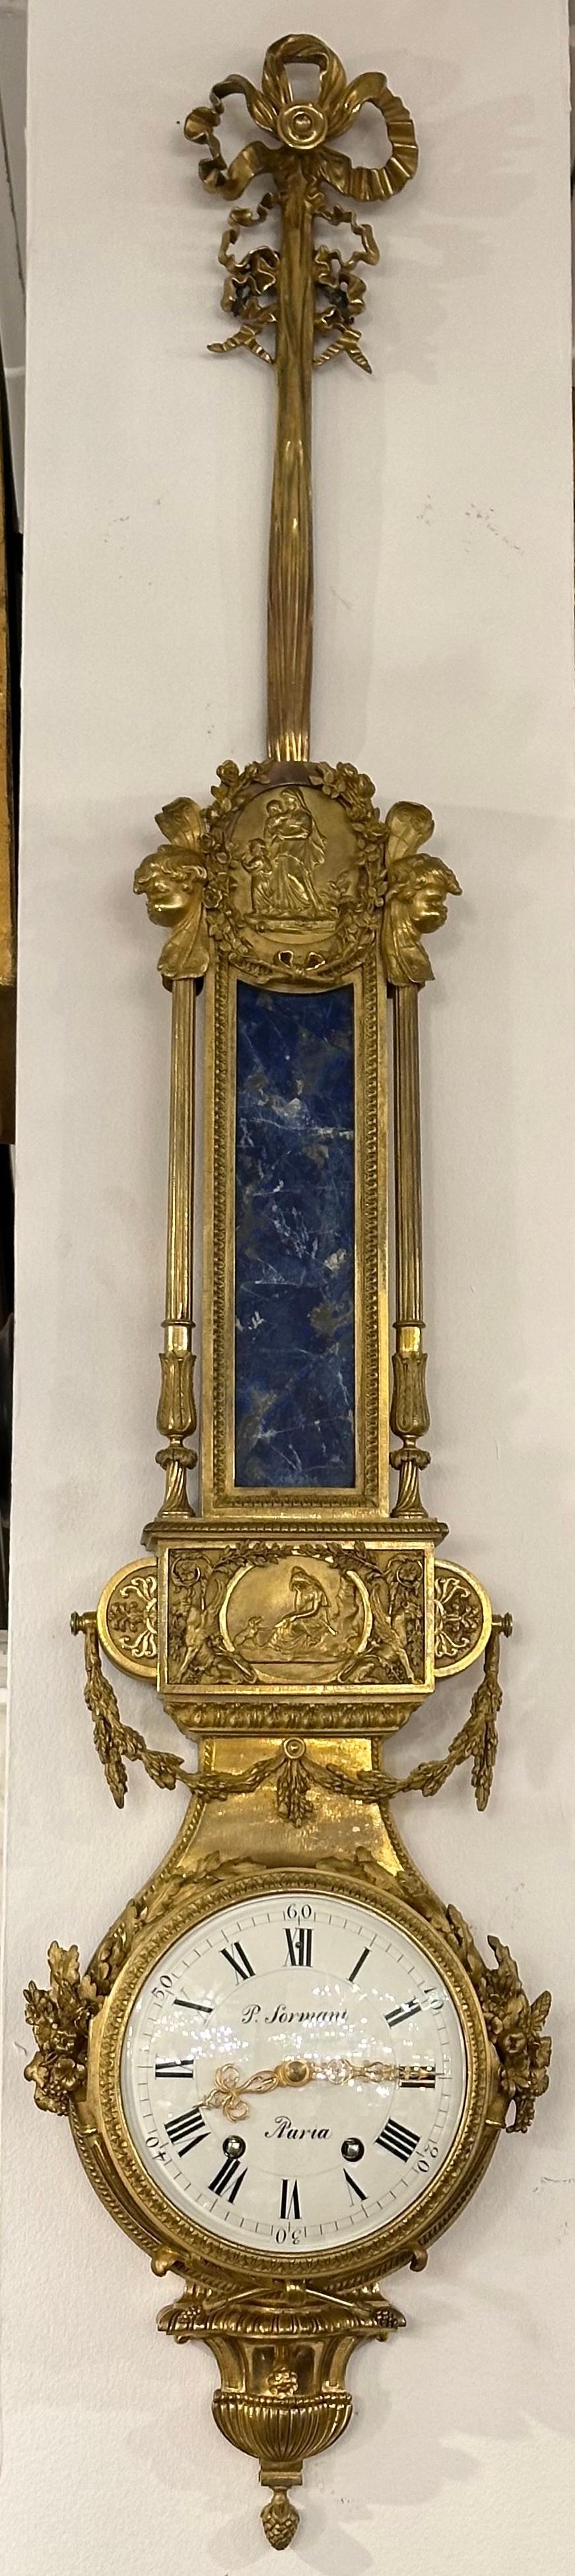 Elegant wall clock by Paul Sormani, in blue lapis lazuli and gilt bronze ormolu. 
 Paul Sormani was a famed French 19th century cabinetmaker, renown for his production of magnificent luxury furniture in the style of Louis XIV, Louis XV and Louis